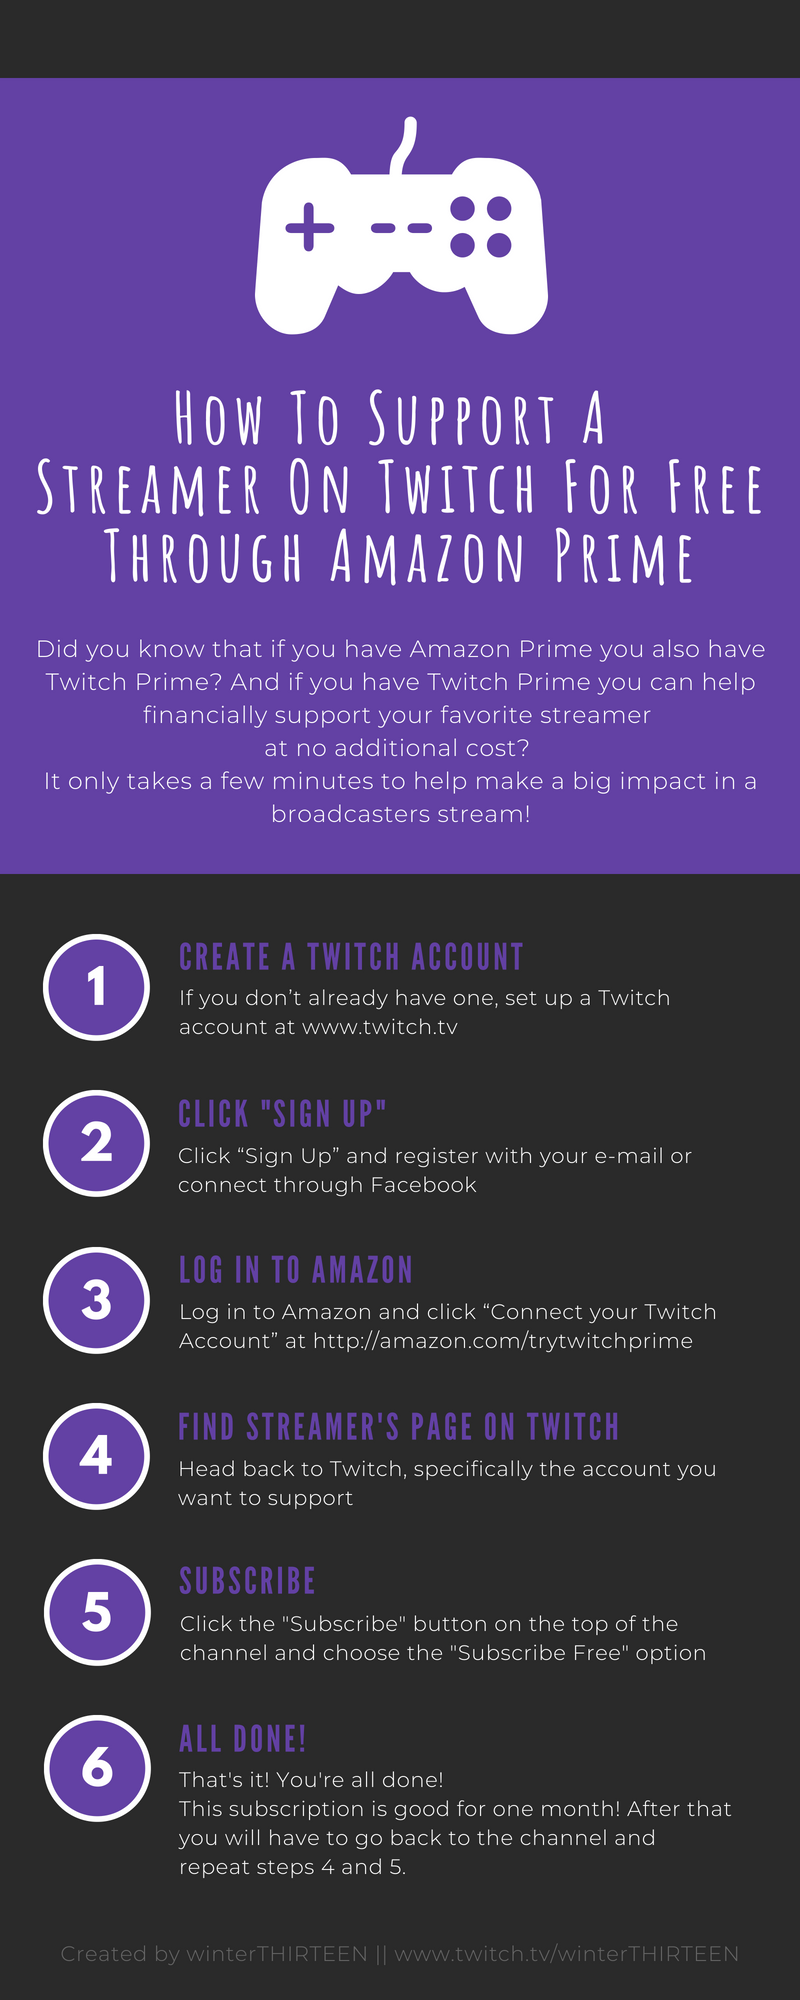 How To Support A Streamer On Twitch For Free Through Amazon Prime Ashley Villers